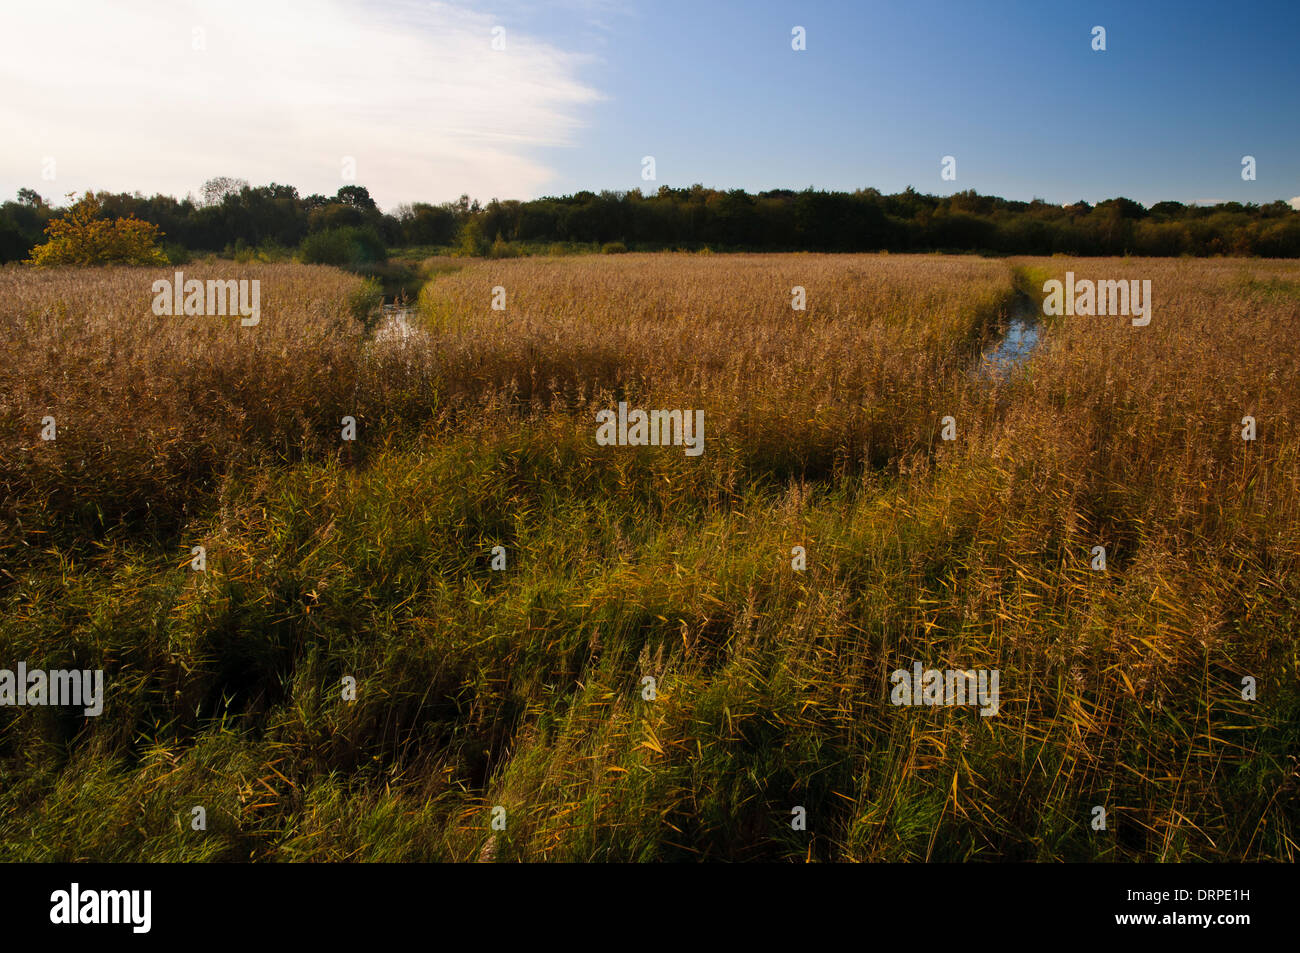 Wetland and reedbed habitat at the Yorkshire Wildlife Trust nature reserve at Potteric Carr, Doncaster, South Yorkshire. October Stock Photo